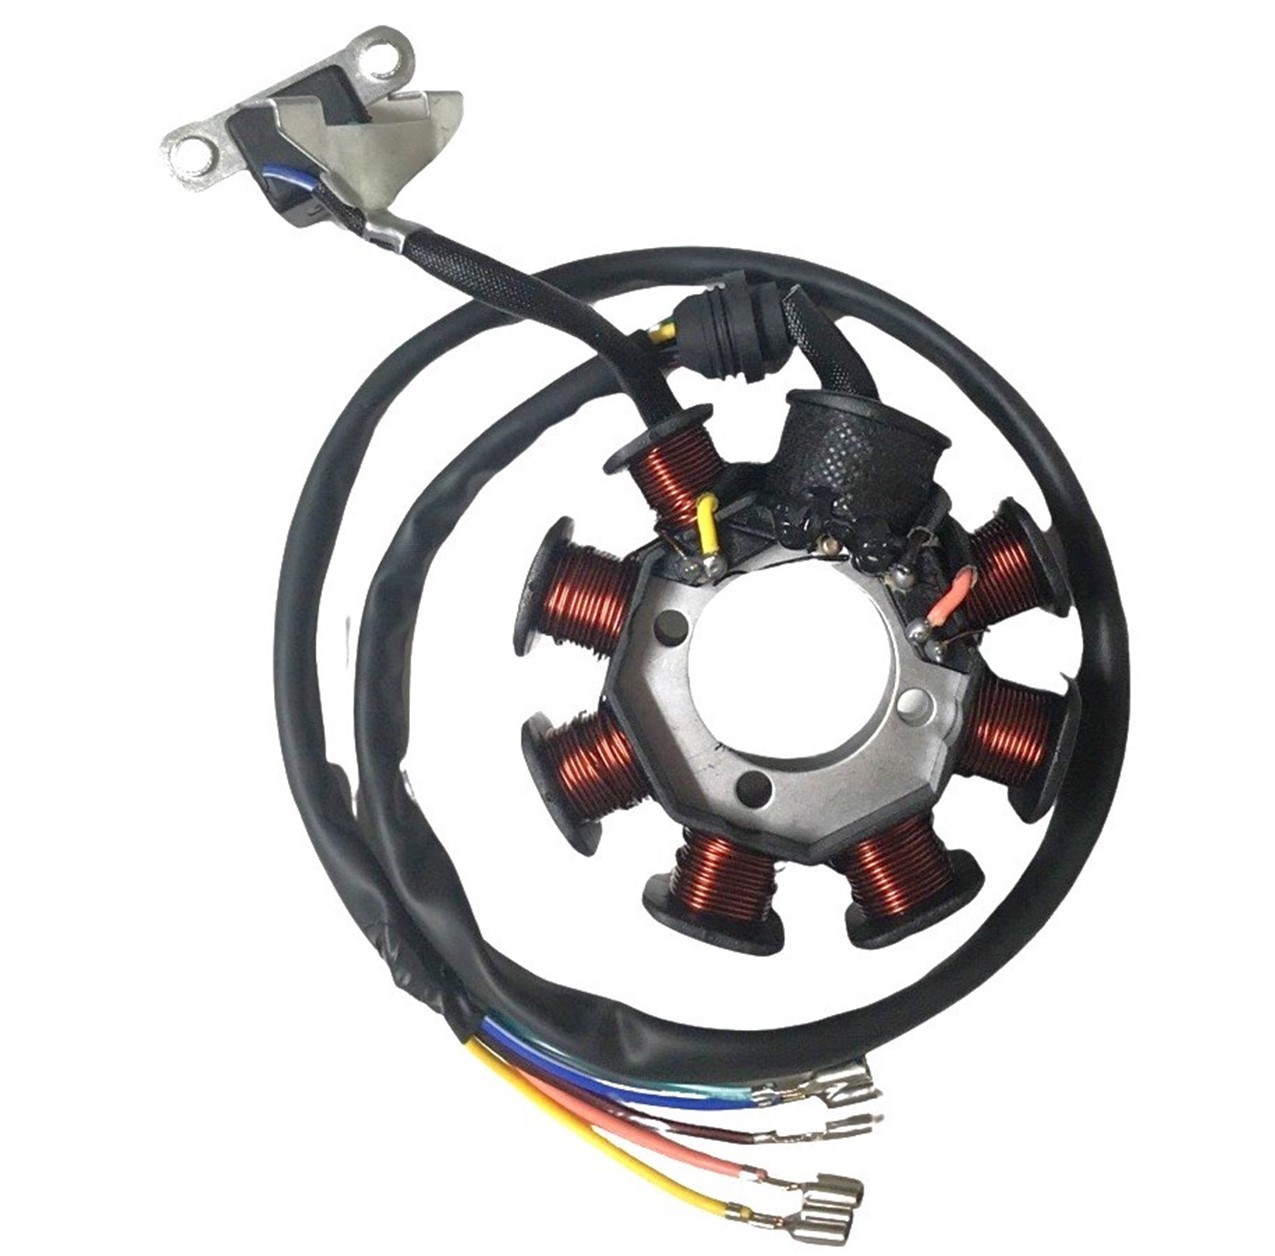 Stator 250cc Fits CG125 & CG150 + others 8 Coil 5 Wires (includes 6 pin connector) OD=88 ID=32 H=28 Bolts c/c=28